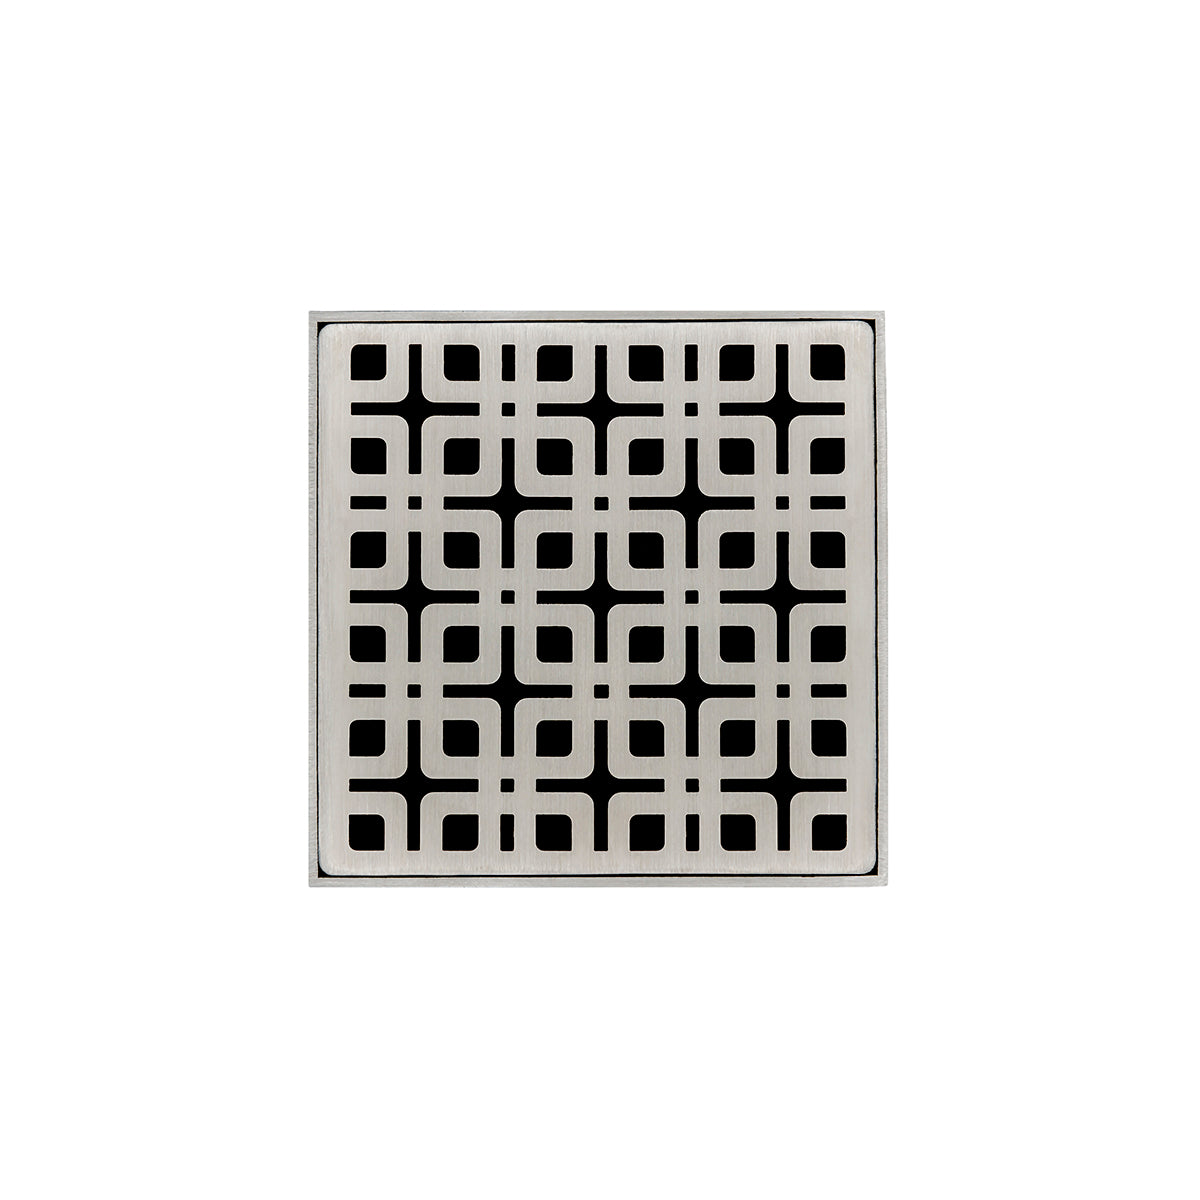 Infinity Drain 4" x 4" KD 4 Premium Center Drain Kit with Link Pattern Decorative Plate with Cast Iron Drain Body for Hot Mop, 2" Outlet